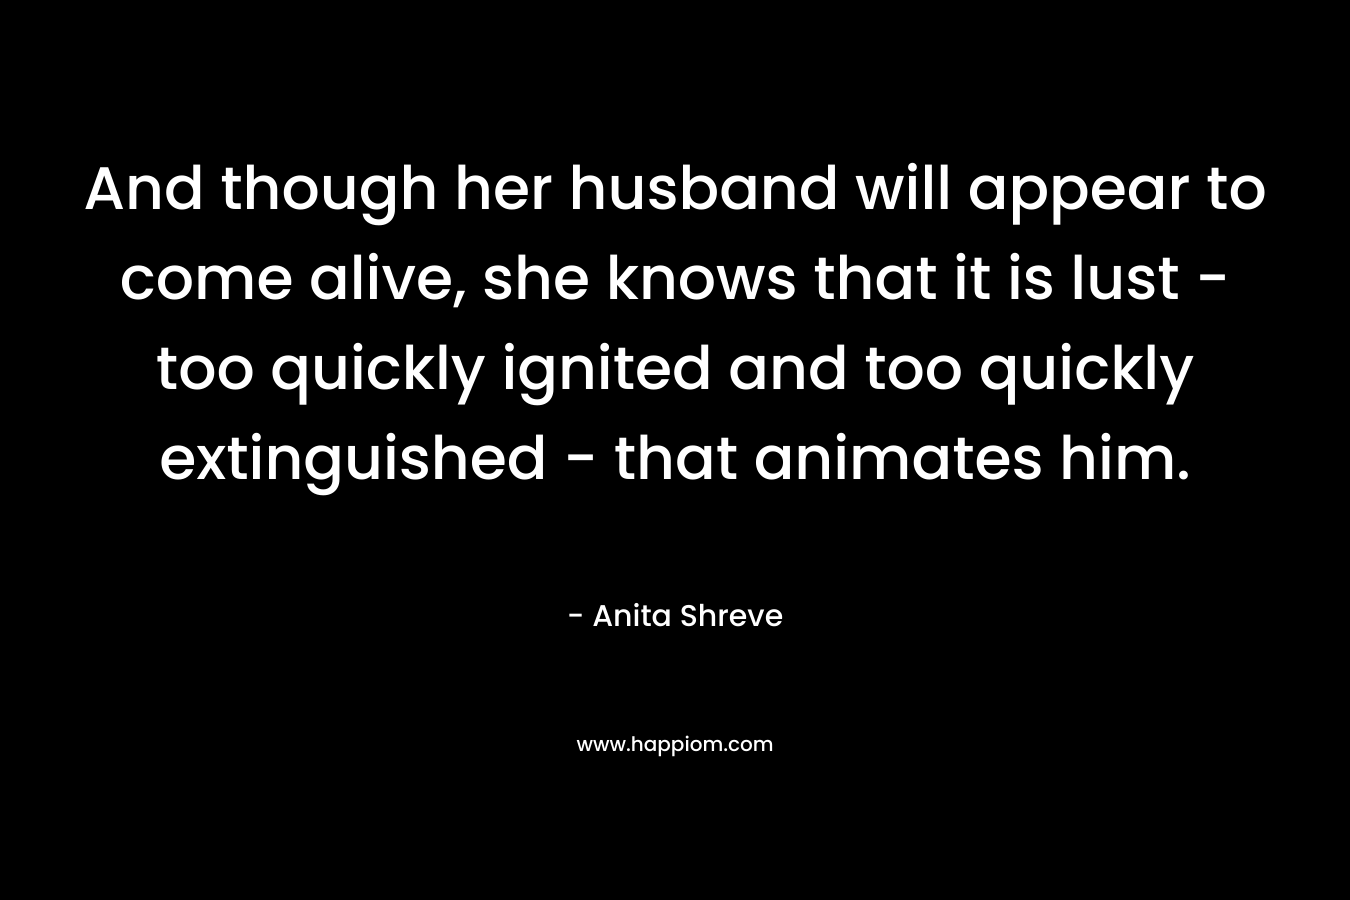 And though her husband will appear to come alive, she knows that it is lust – too quickly ignited and too quickly extinguished – that animates him. – Anita Shreve